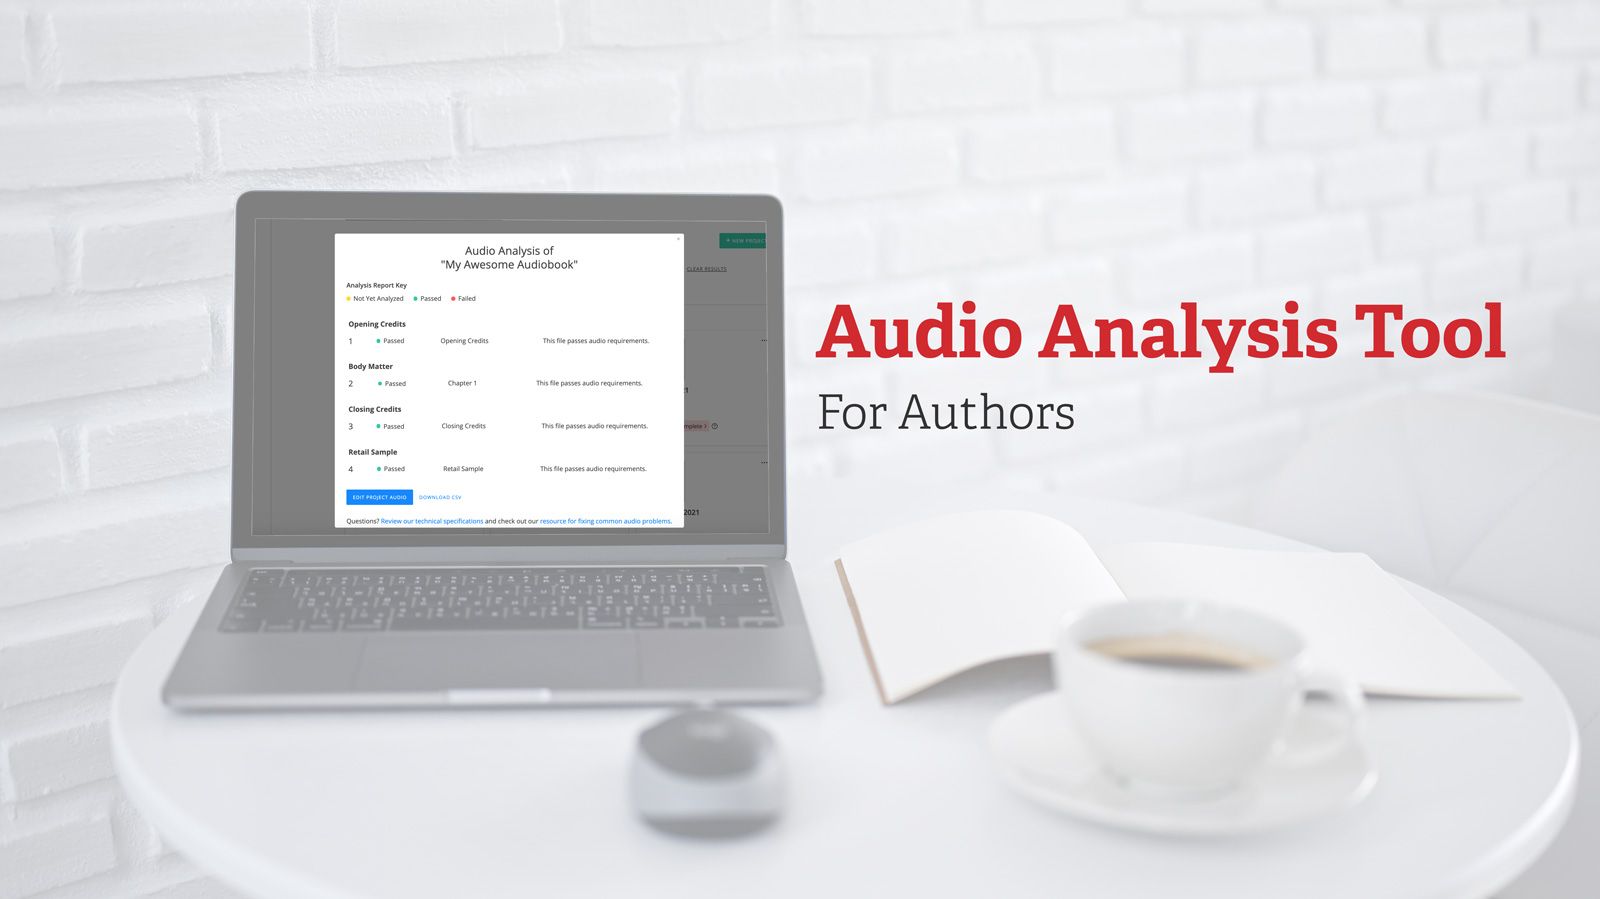 Audio Analysis Tool for Authors